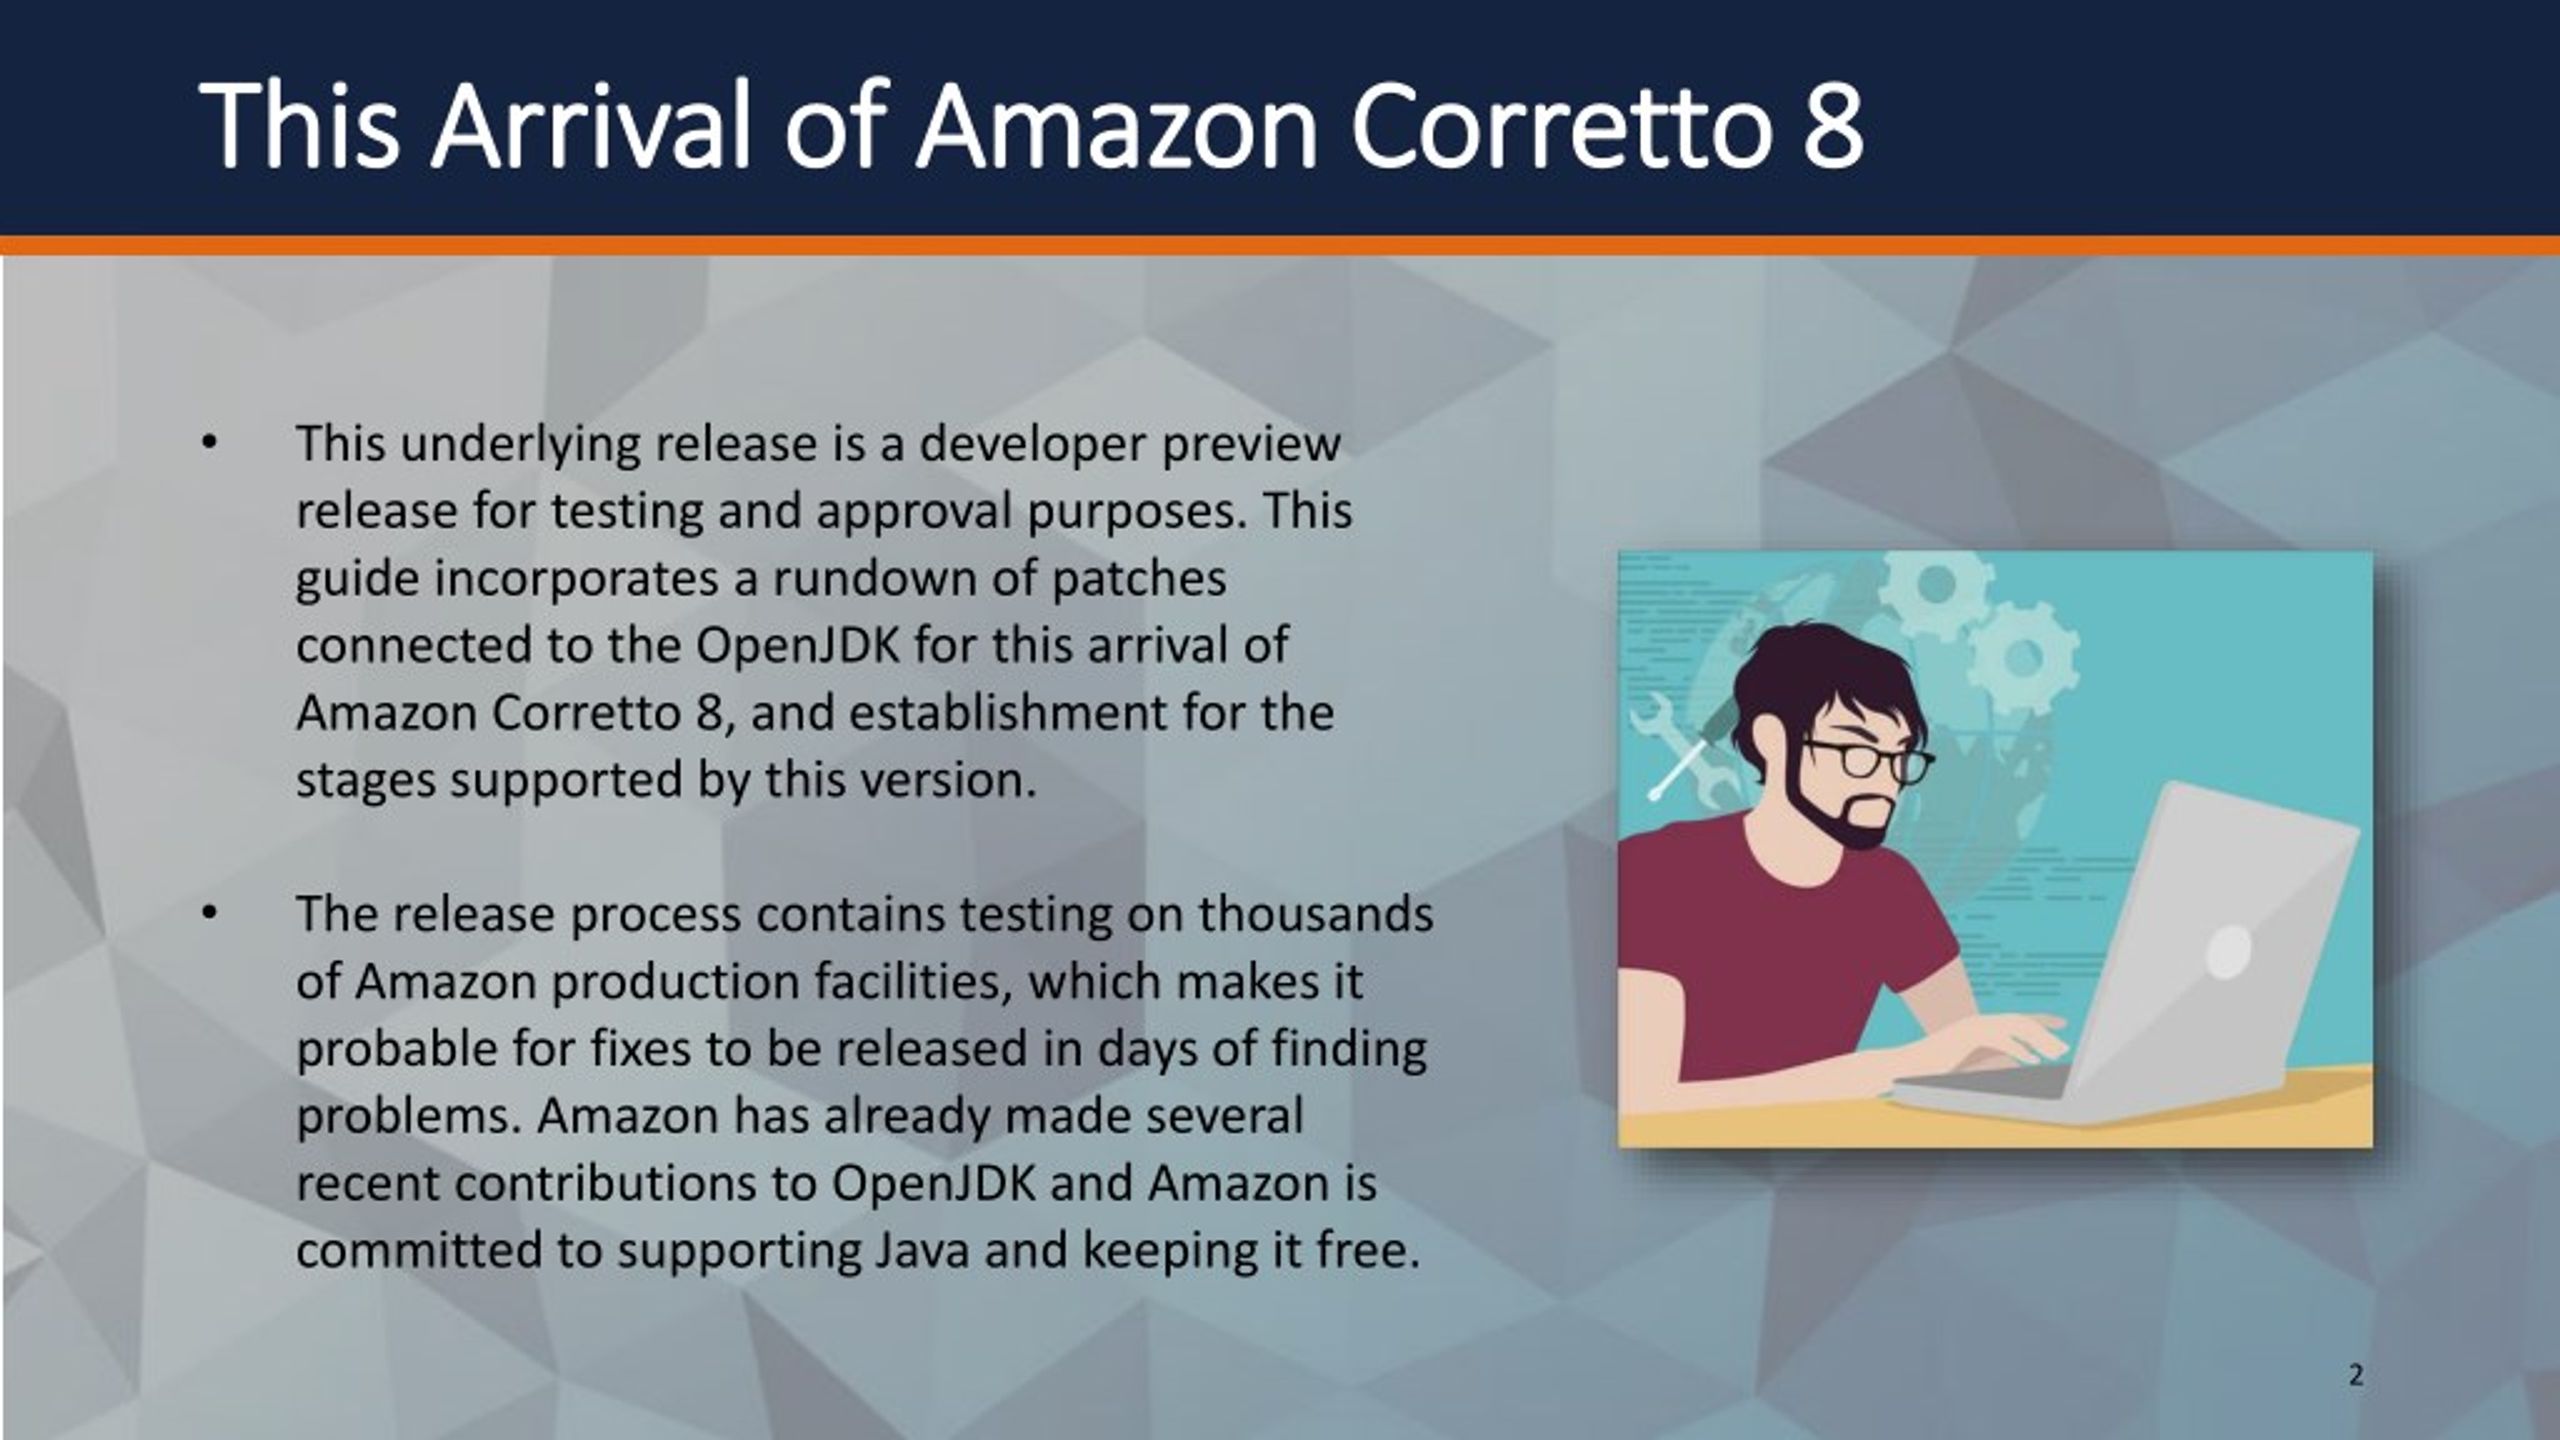 PPT Amazon arrival with Corretto 8, Multiplatform JAVA OpenJDK